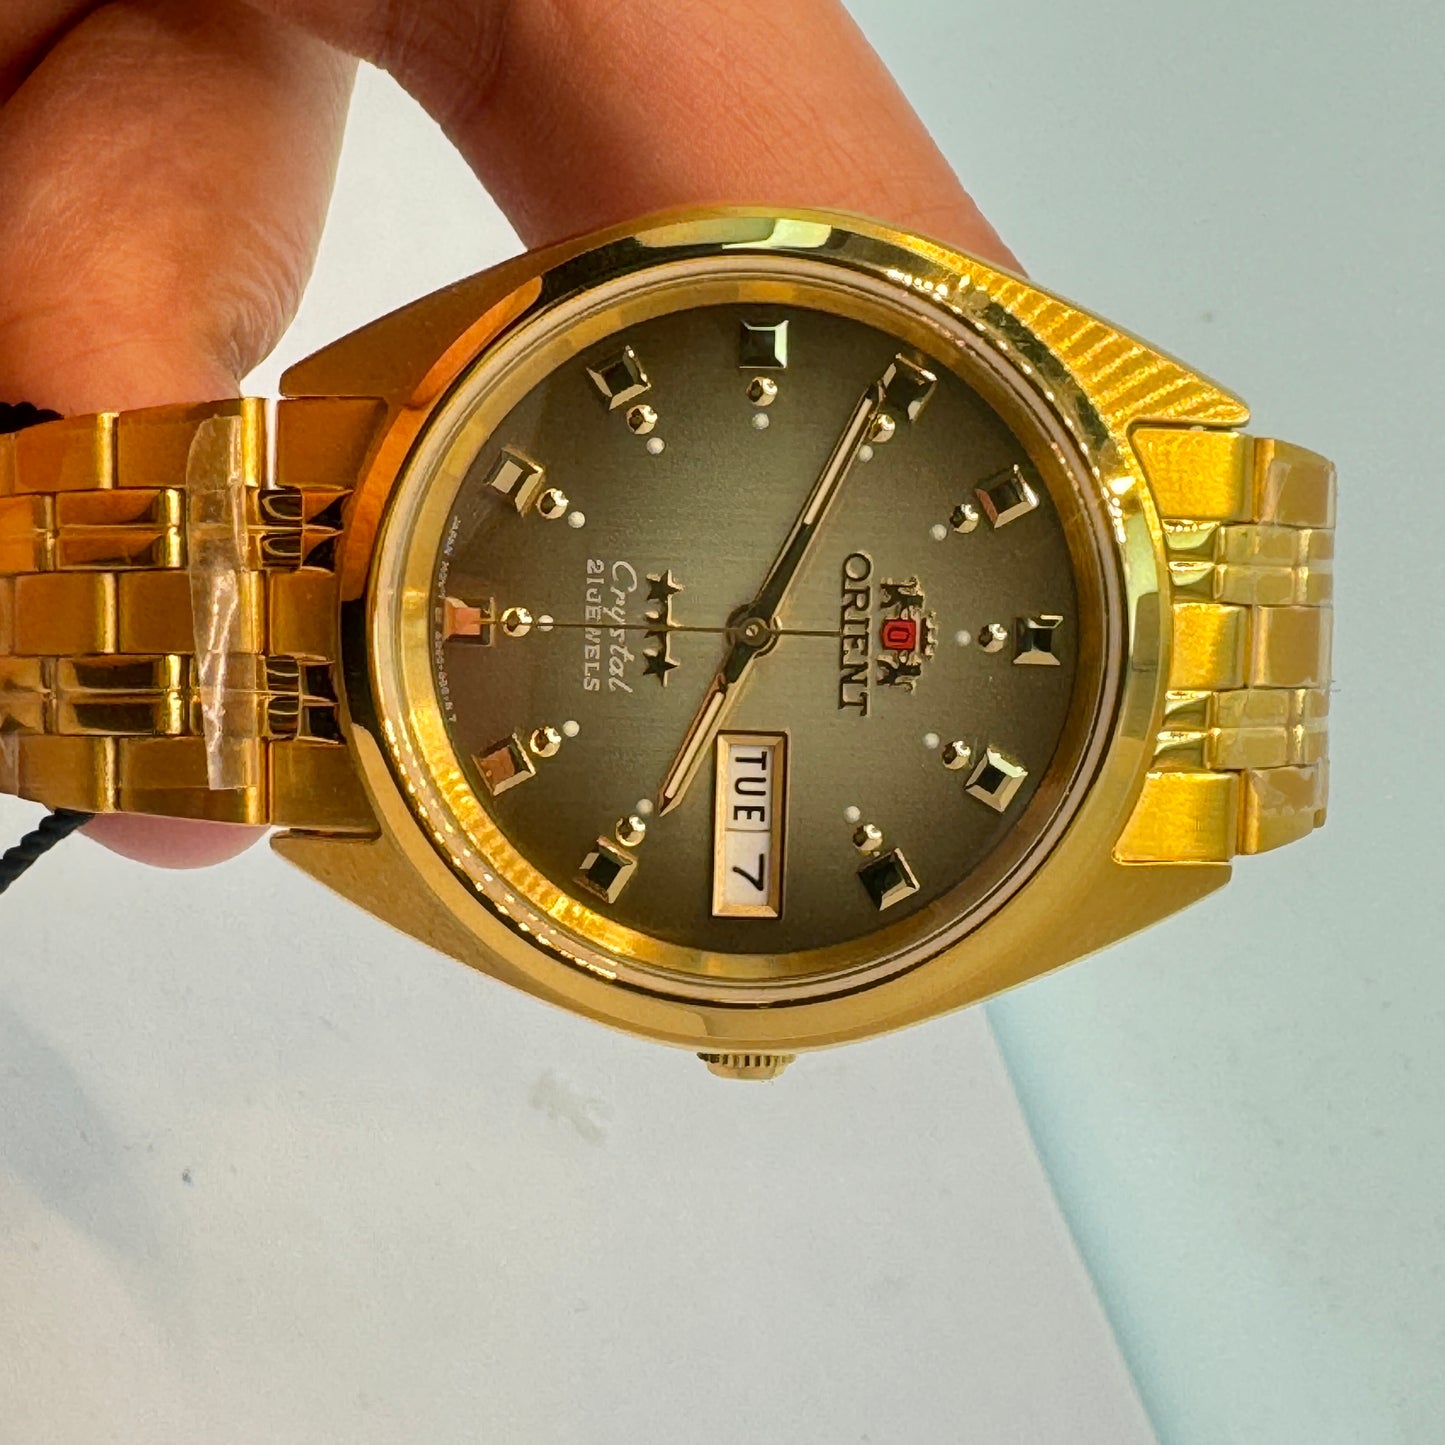 Goldtone Watch , Orient Brand , Automatic Movement , for Men , Brand New , Stainless Steel ,  37 mm diameter  8 “ Wrist. round long